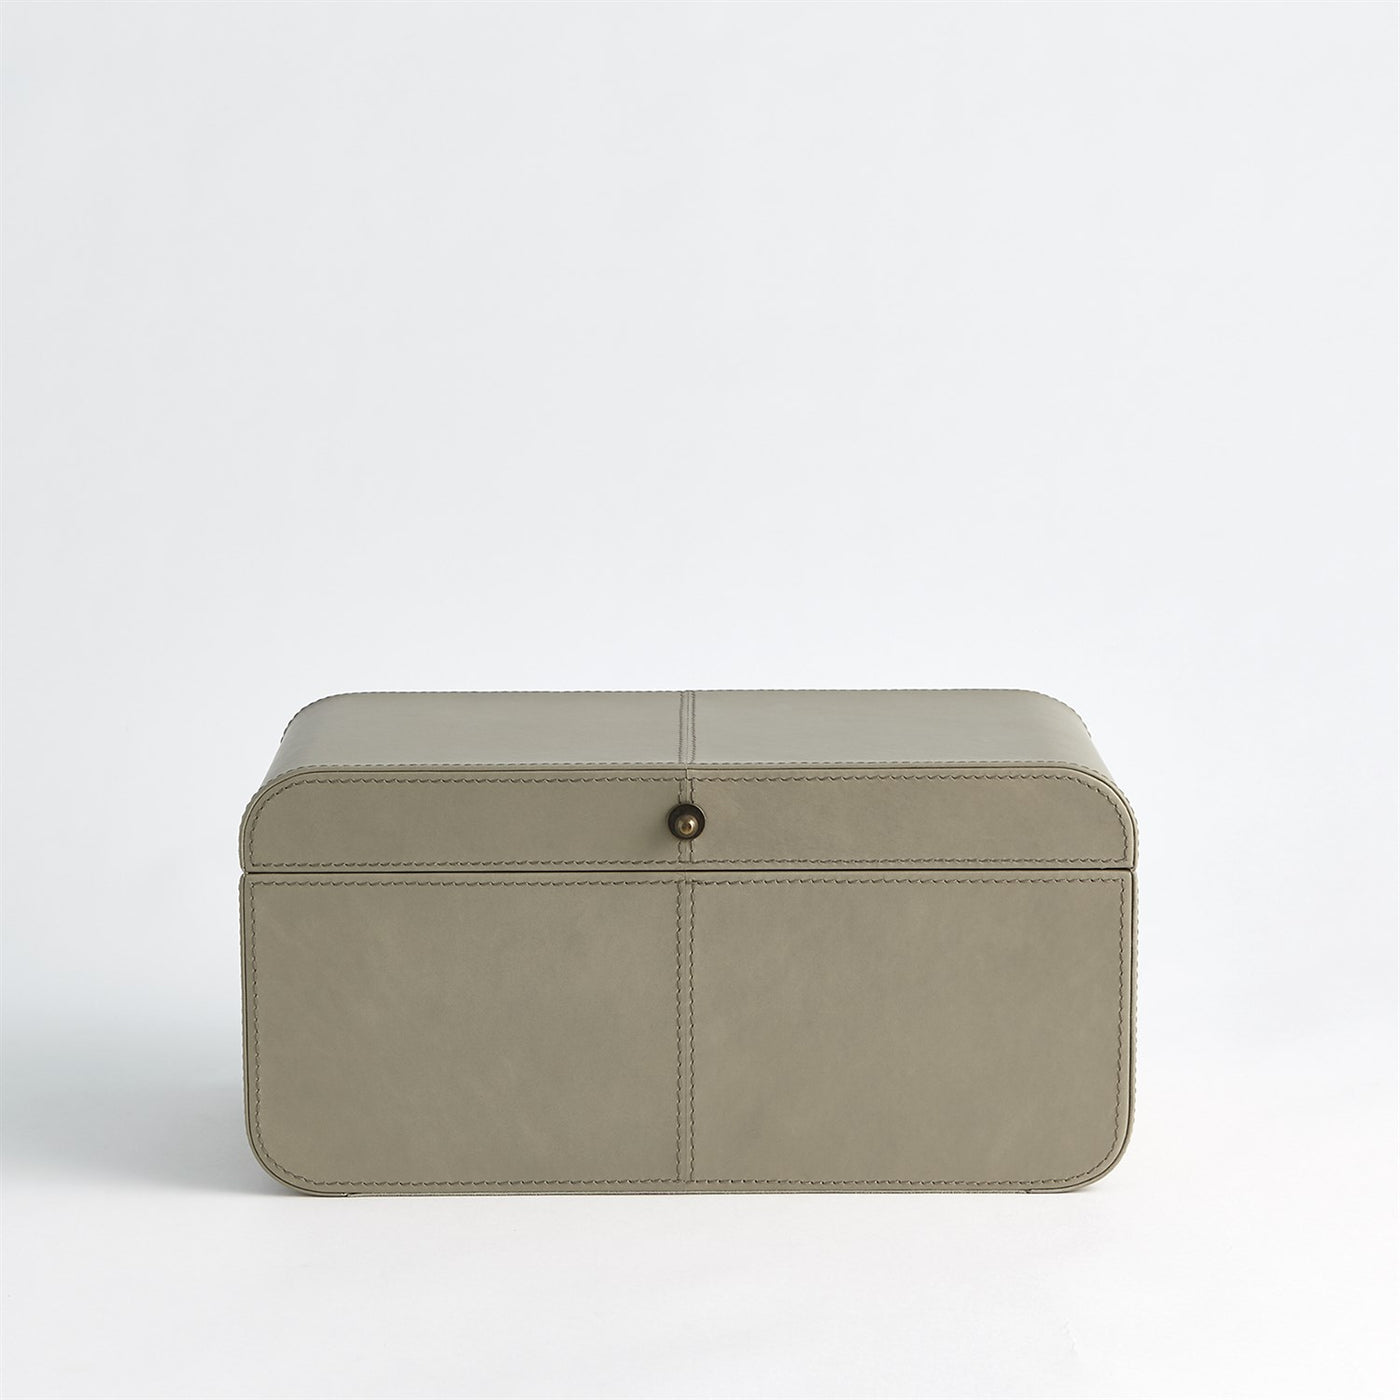 BOX LIGHT GREY CURVED (Available in 2 Sizes)